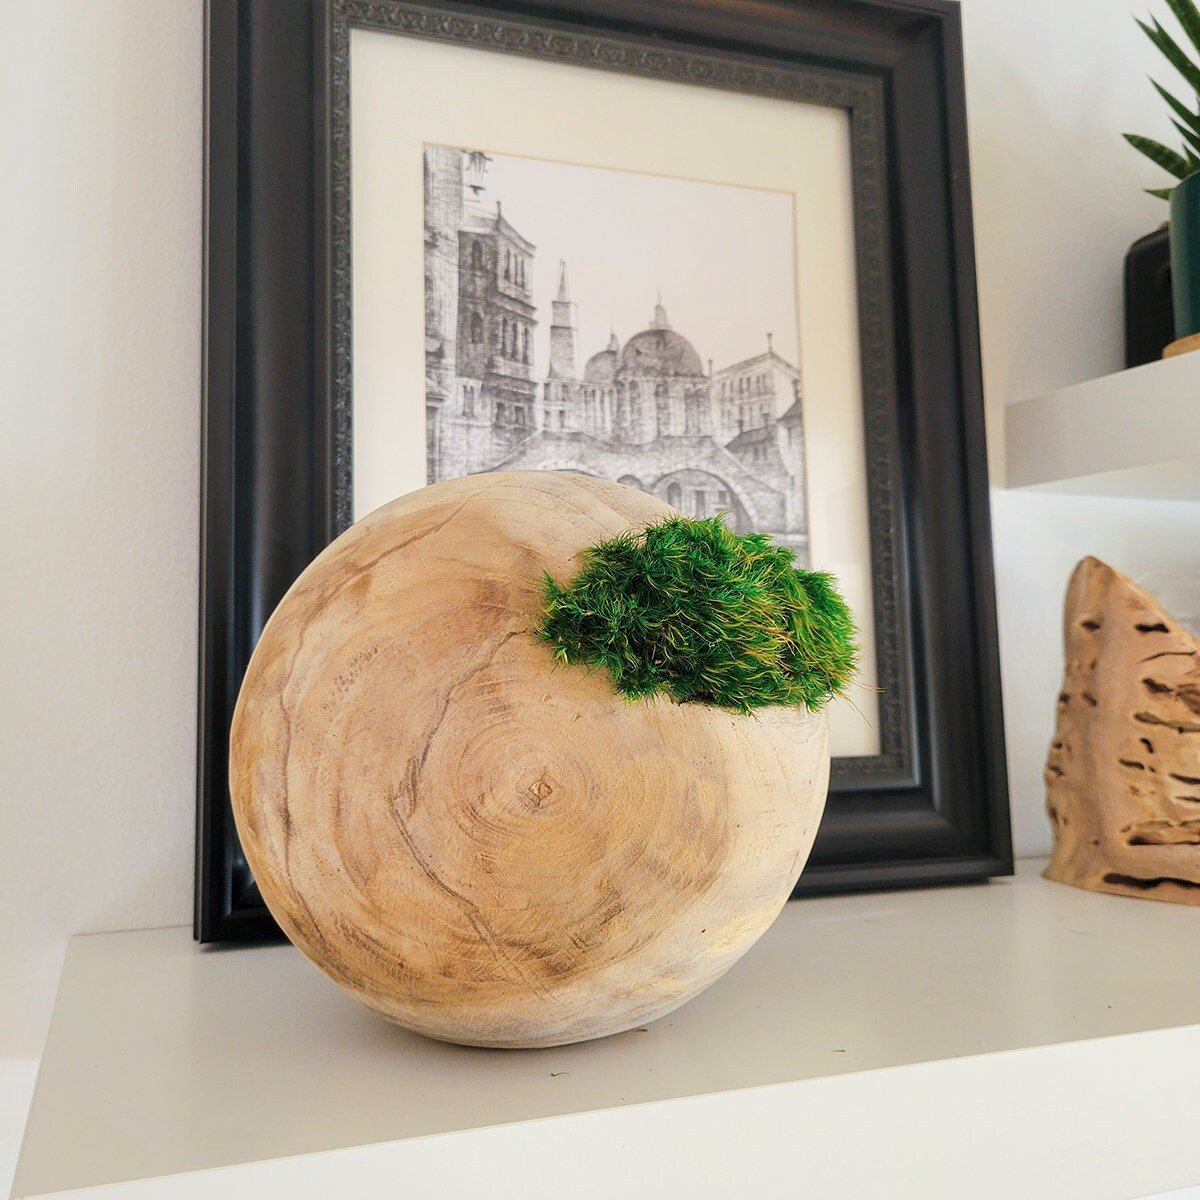 Preserved Moss hugging wooden carved orbs - Mossy Moss by Olia